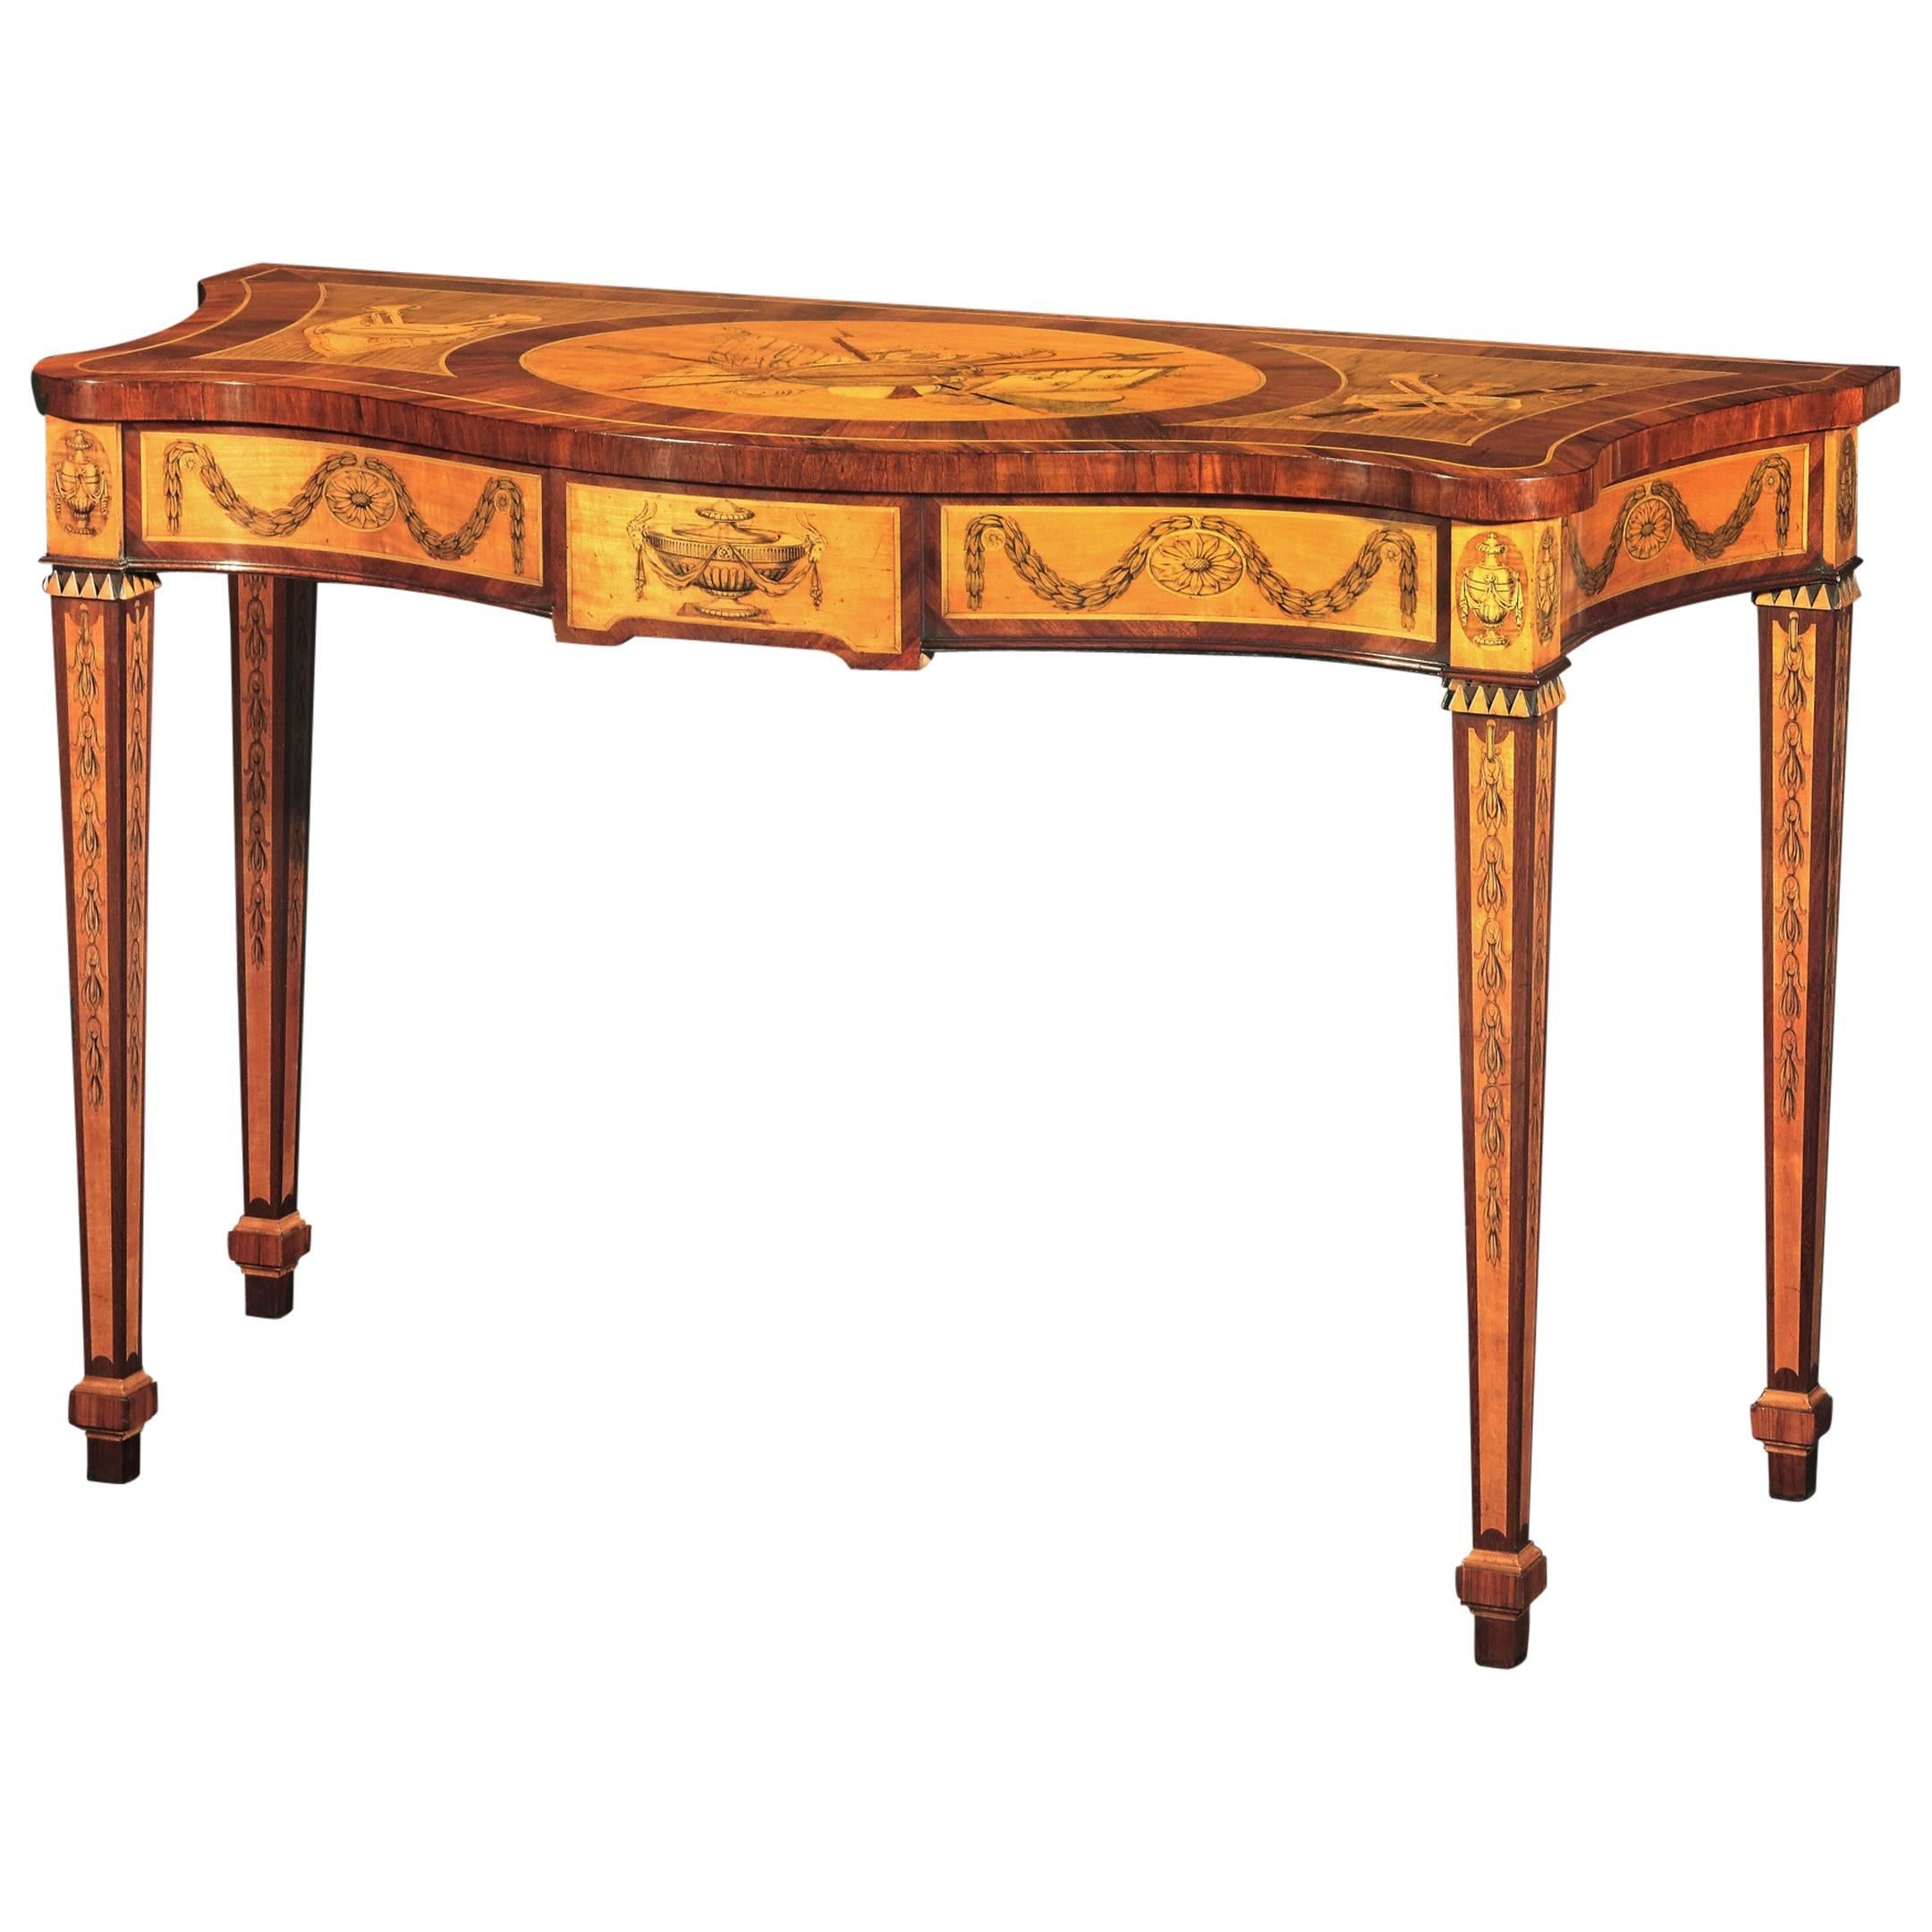 Superb George II Marquetry and Penwork Decorated Serpentine Console Table For Sale